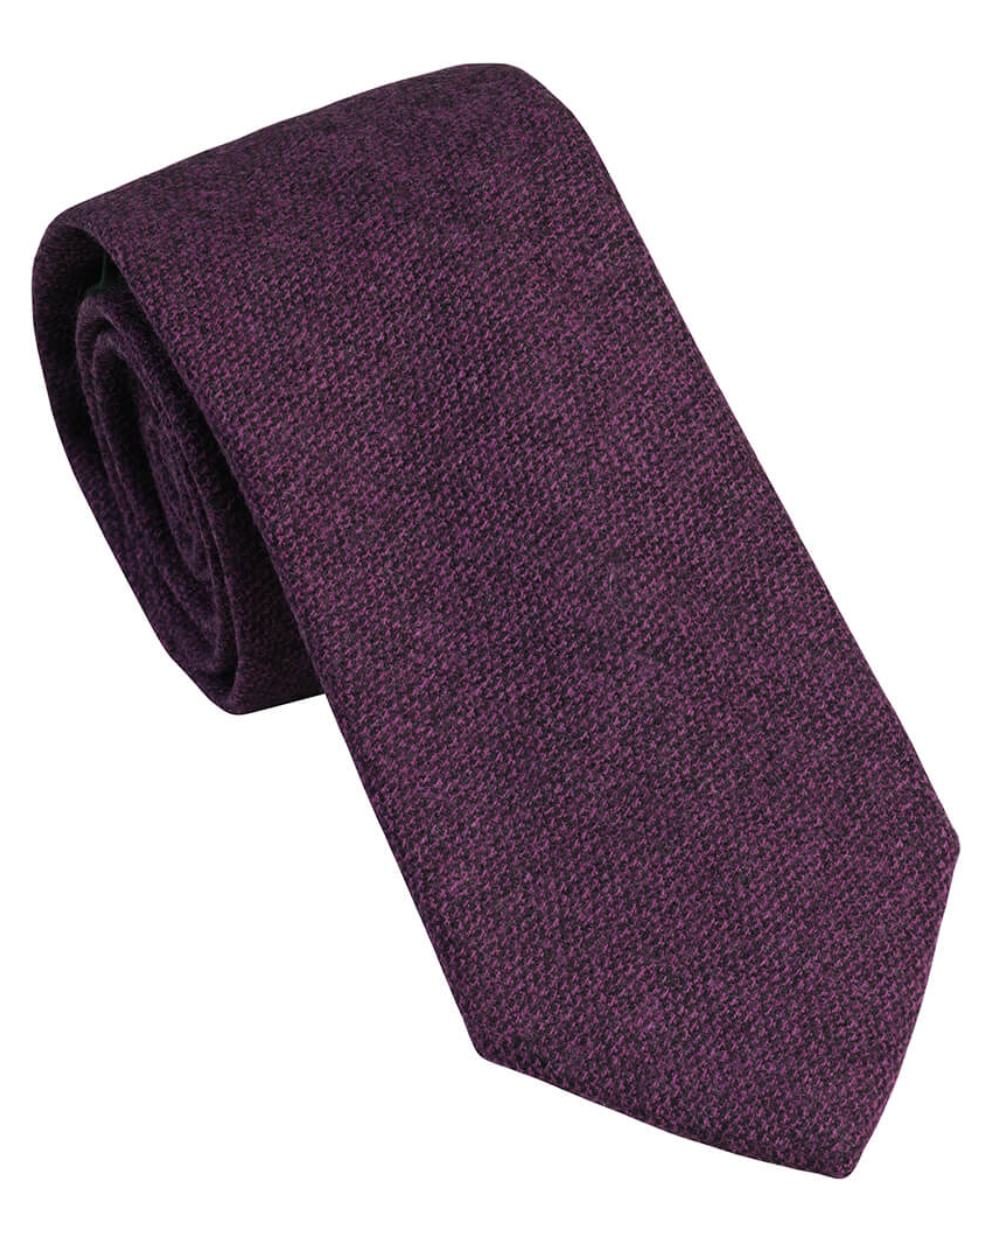 Heather Coloured Laksen Celtic Tweed Tie On A White Background 